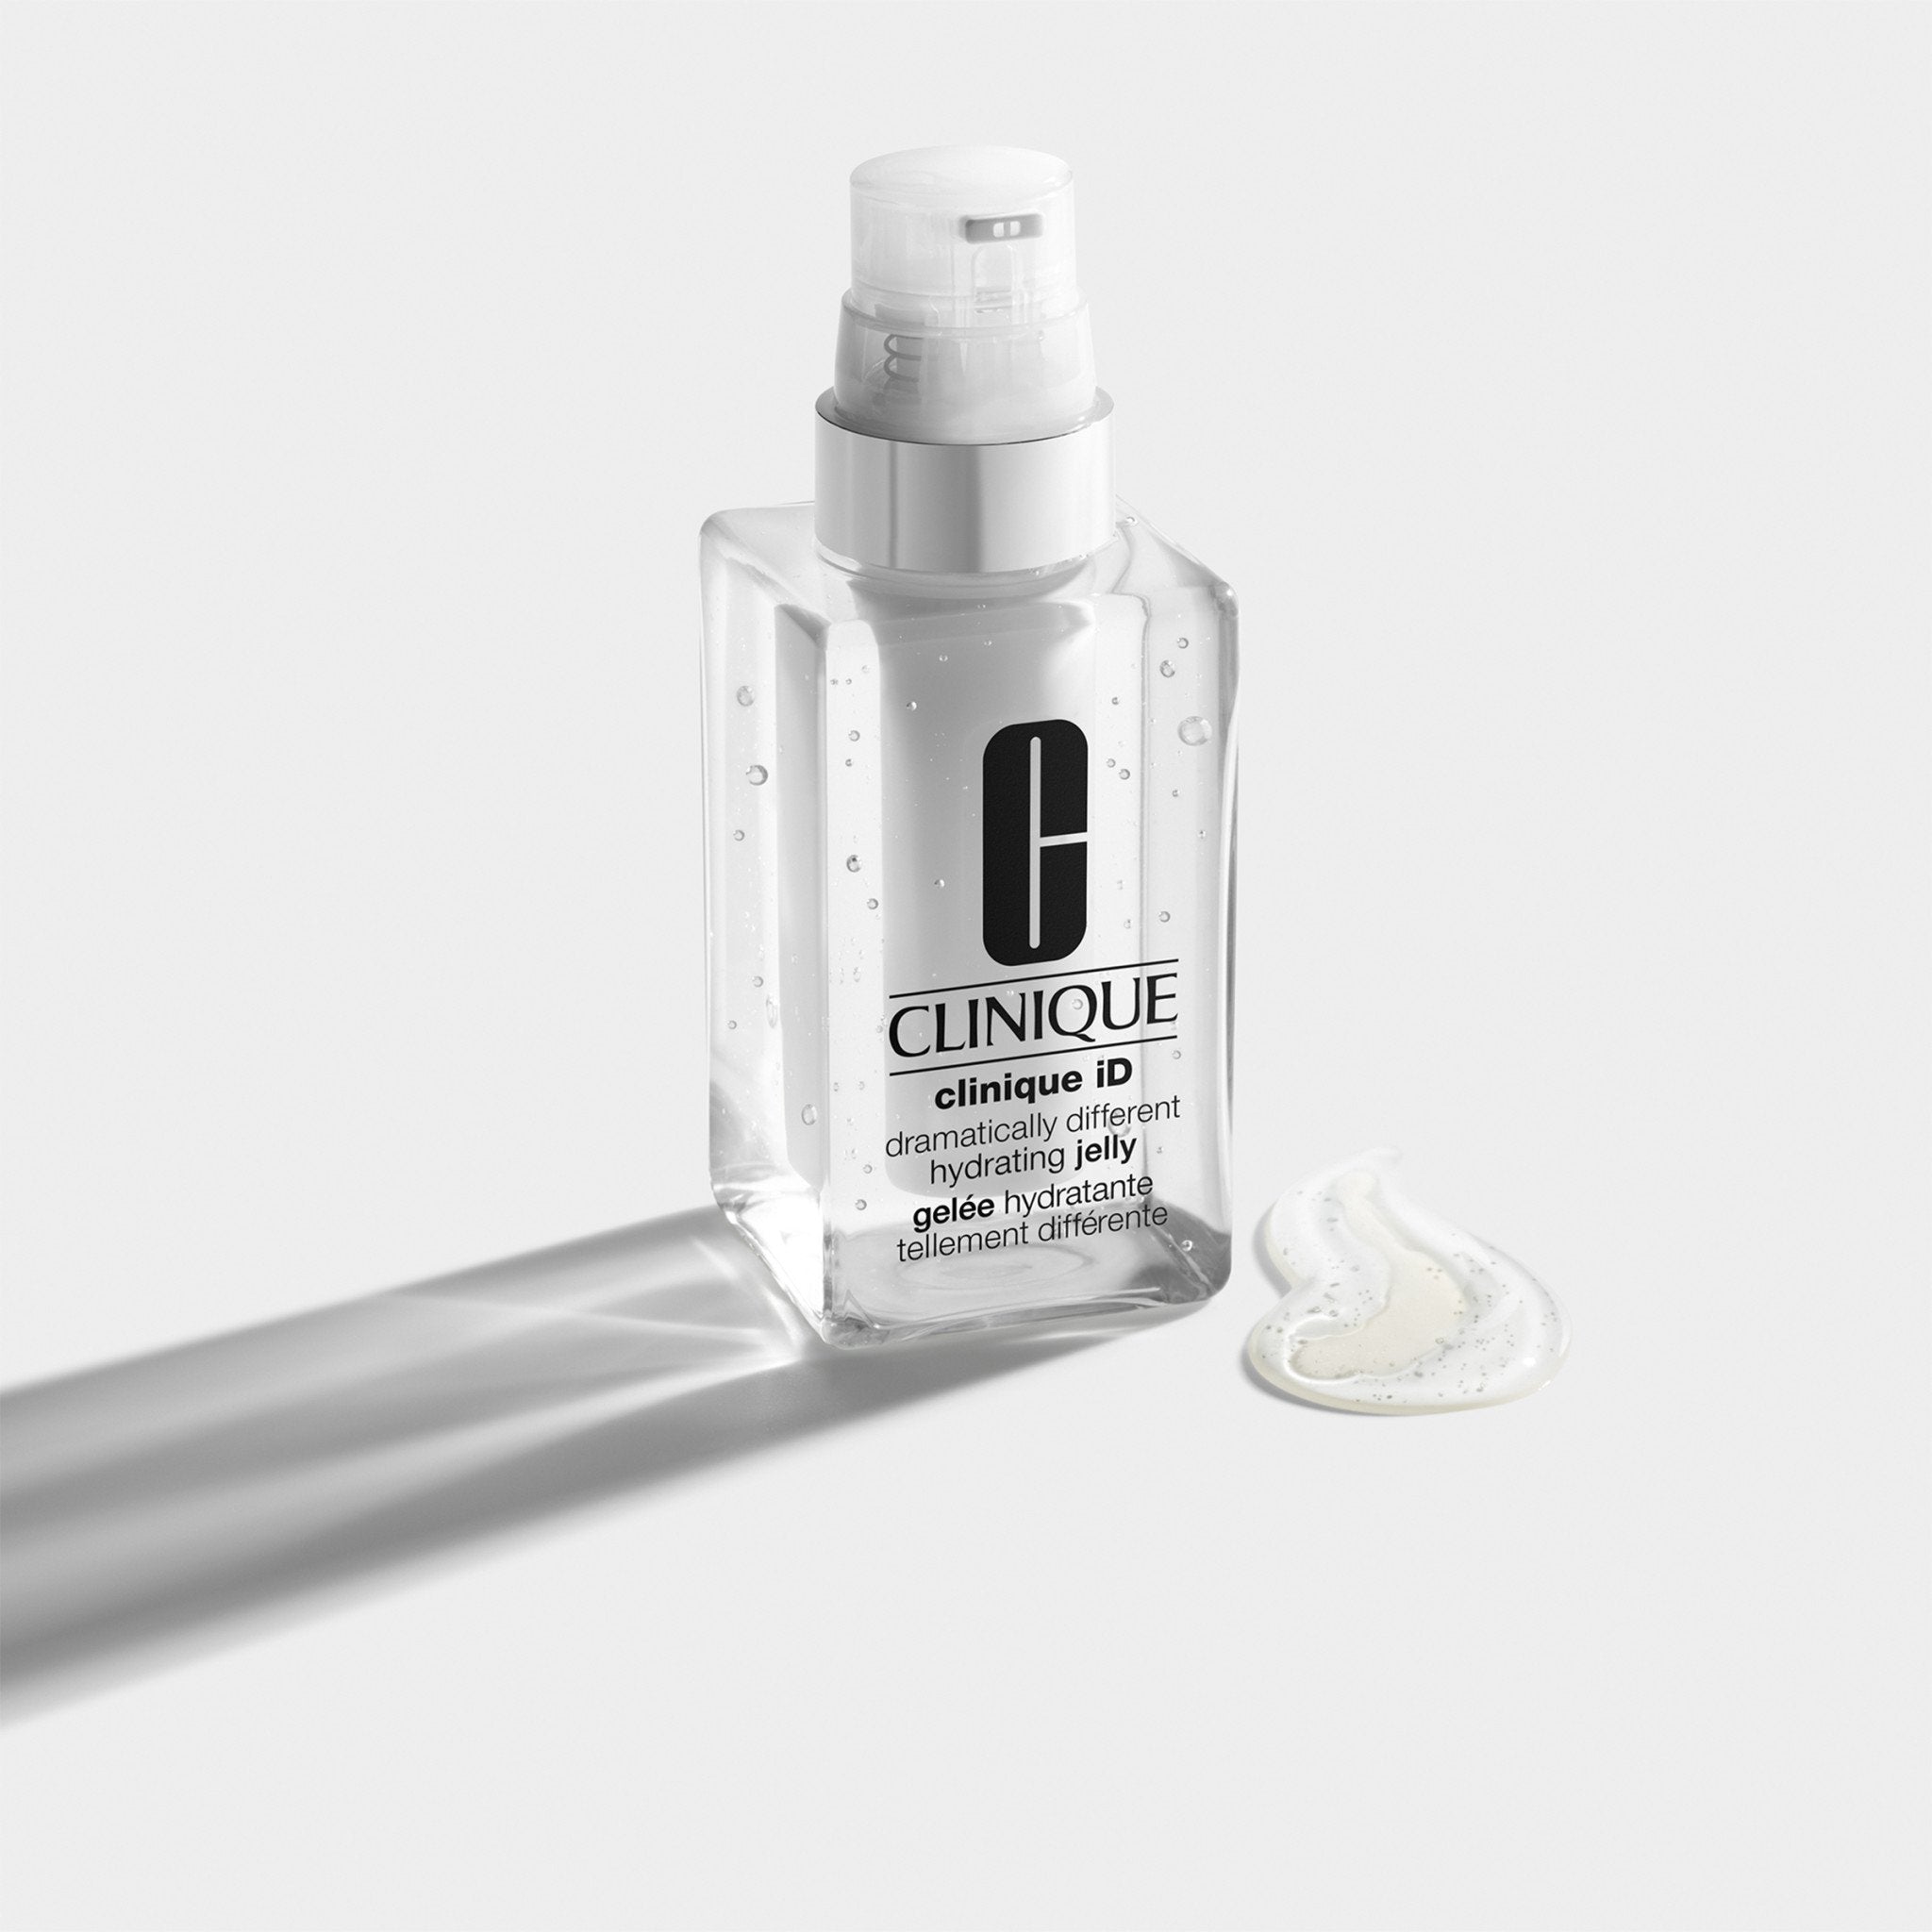 Clinique iD Dramatically Different Hydrating Jelly With Active Cartridge Concentrate™ For Uneven Skin Tone, 4.2 oz